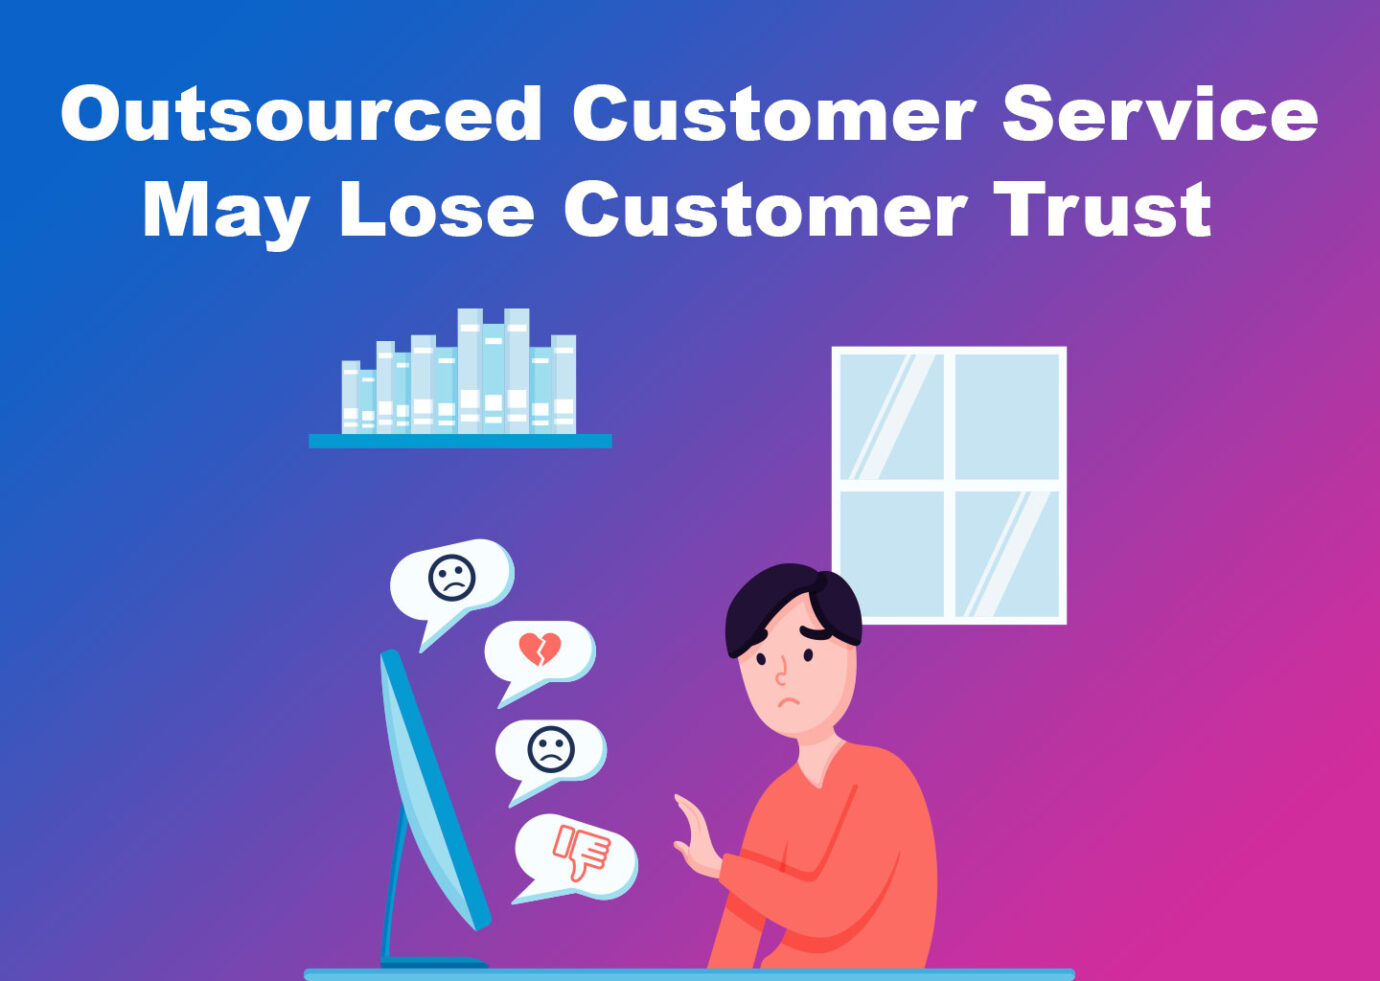 Outsourced Customer Service May Lose Customer Trust